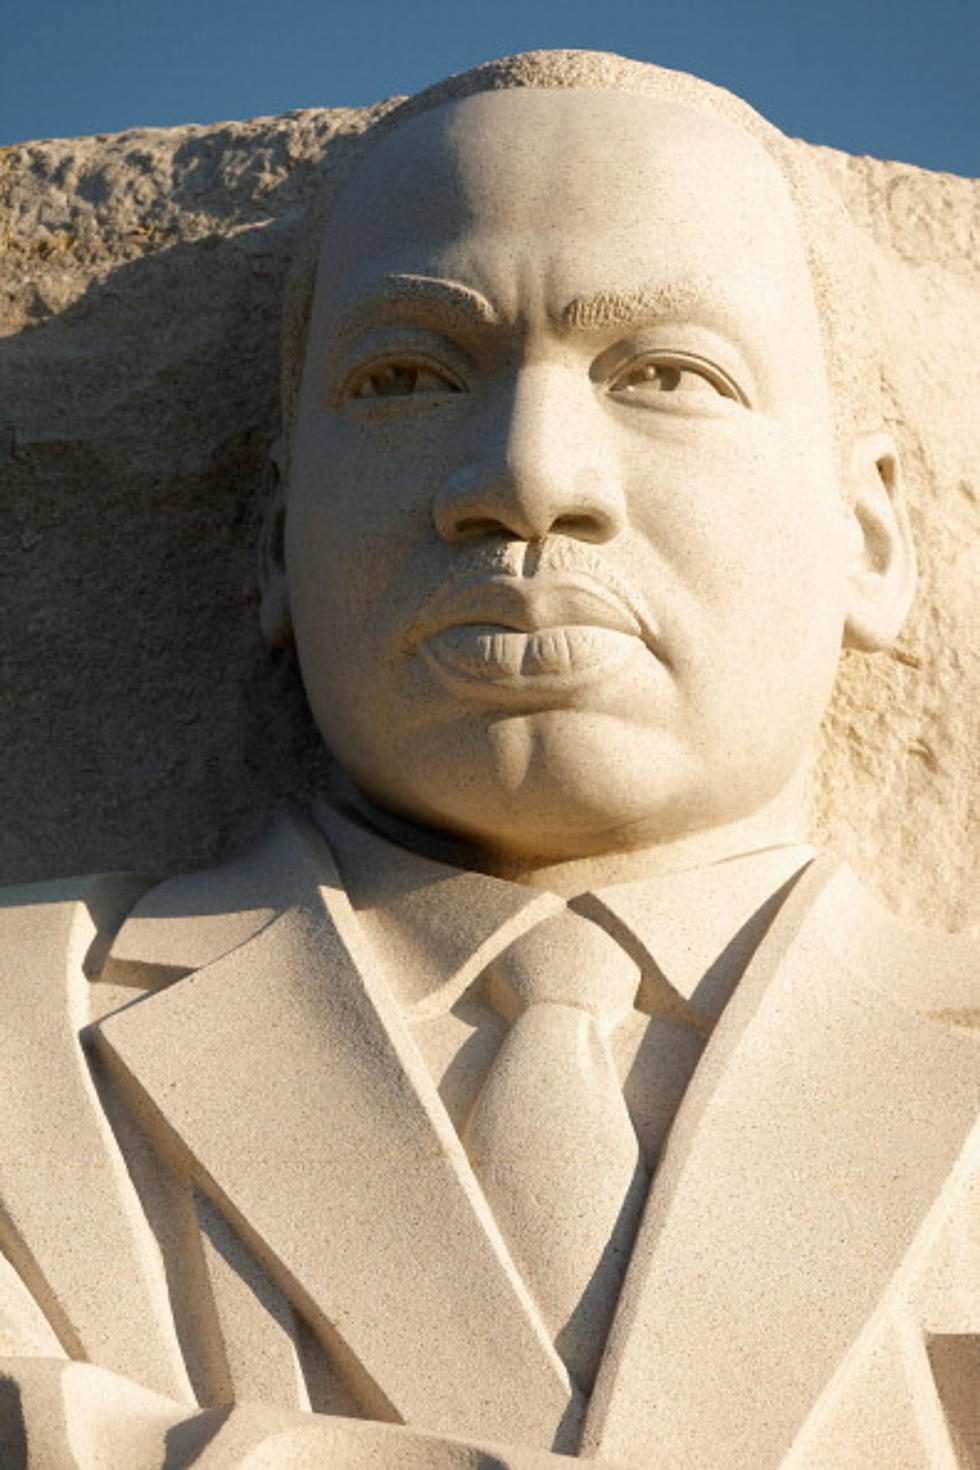 Texas Commemorates Martin Luther King Jr., Day In A Big Way